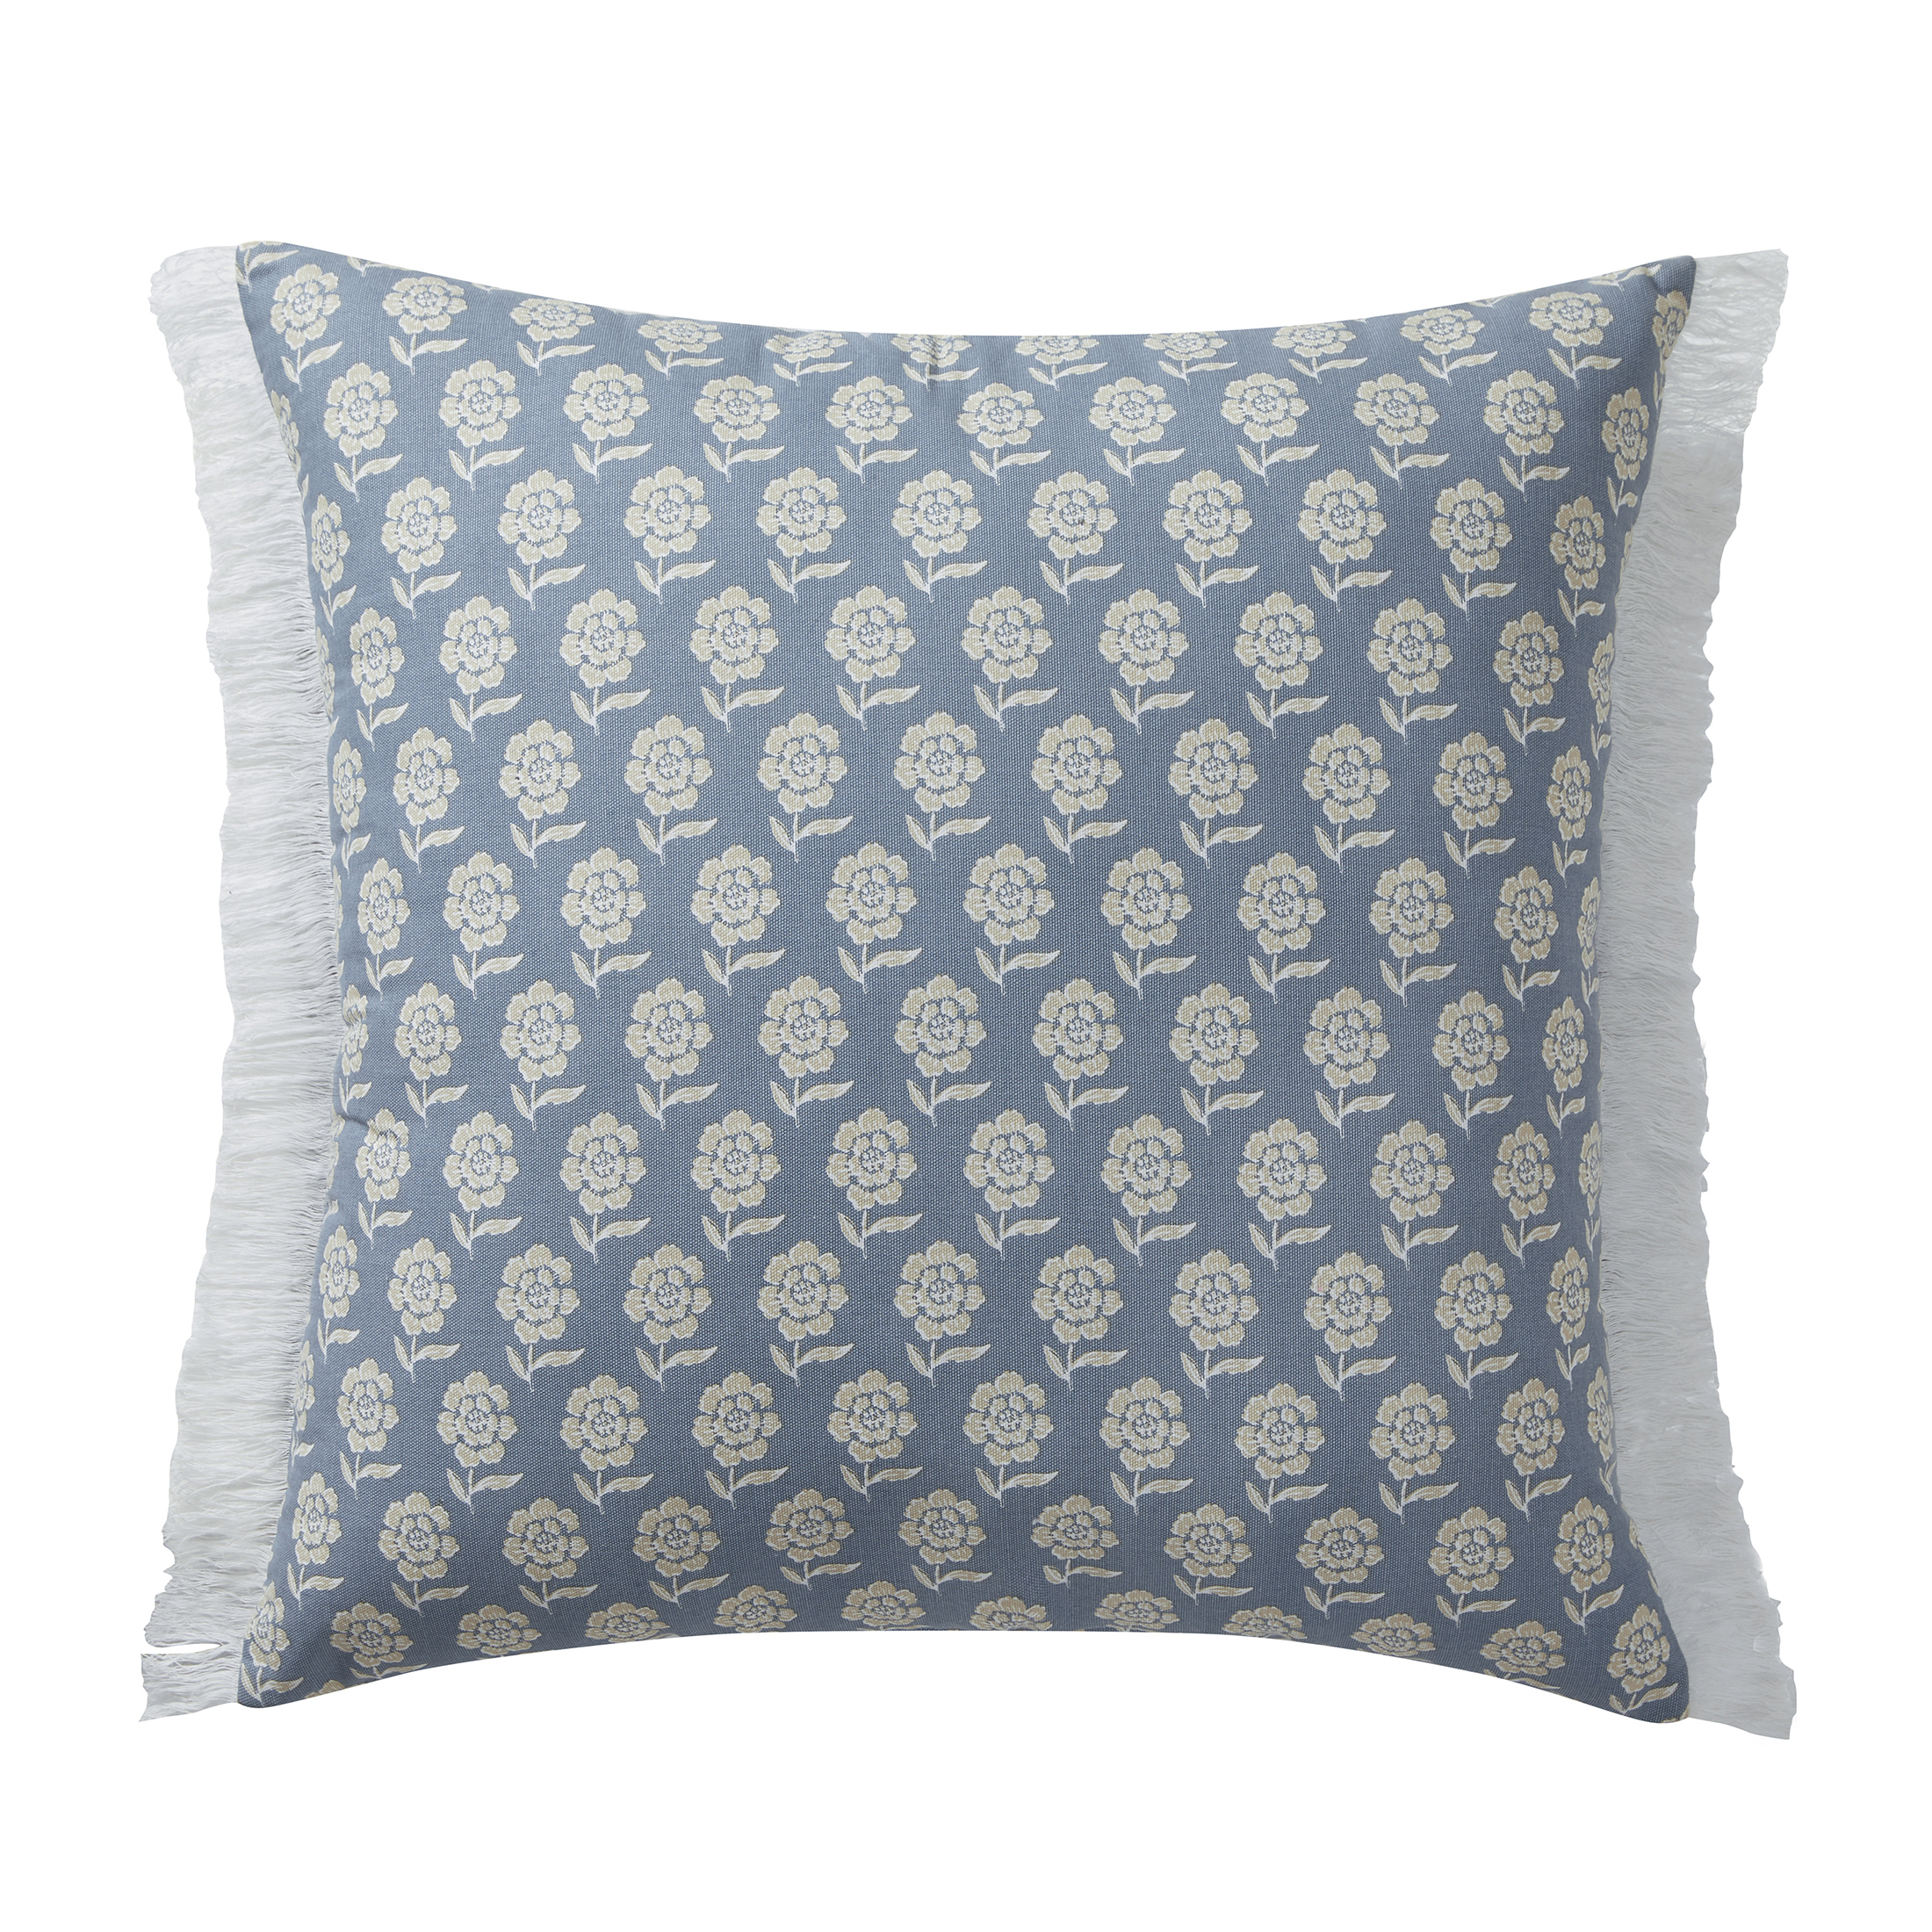 My Texas House 22" x 22" Ivory/Blue Meera Floral Fringe Cotton Decorative Pillow - image 1 of 7